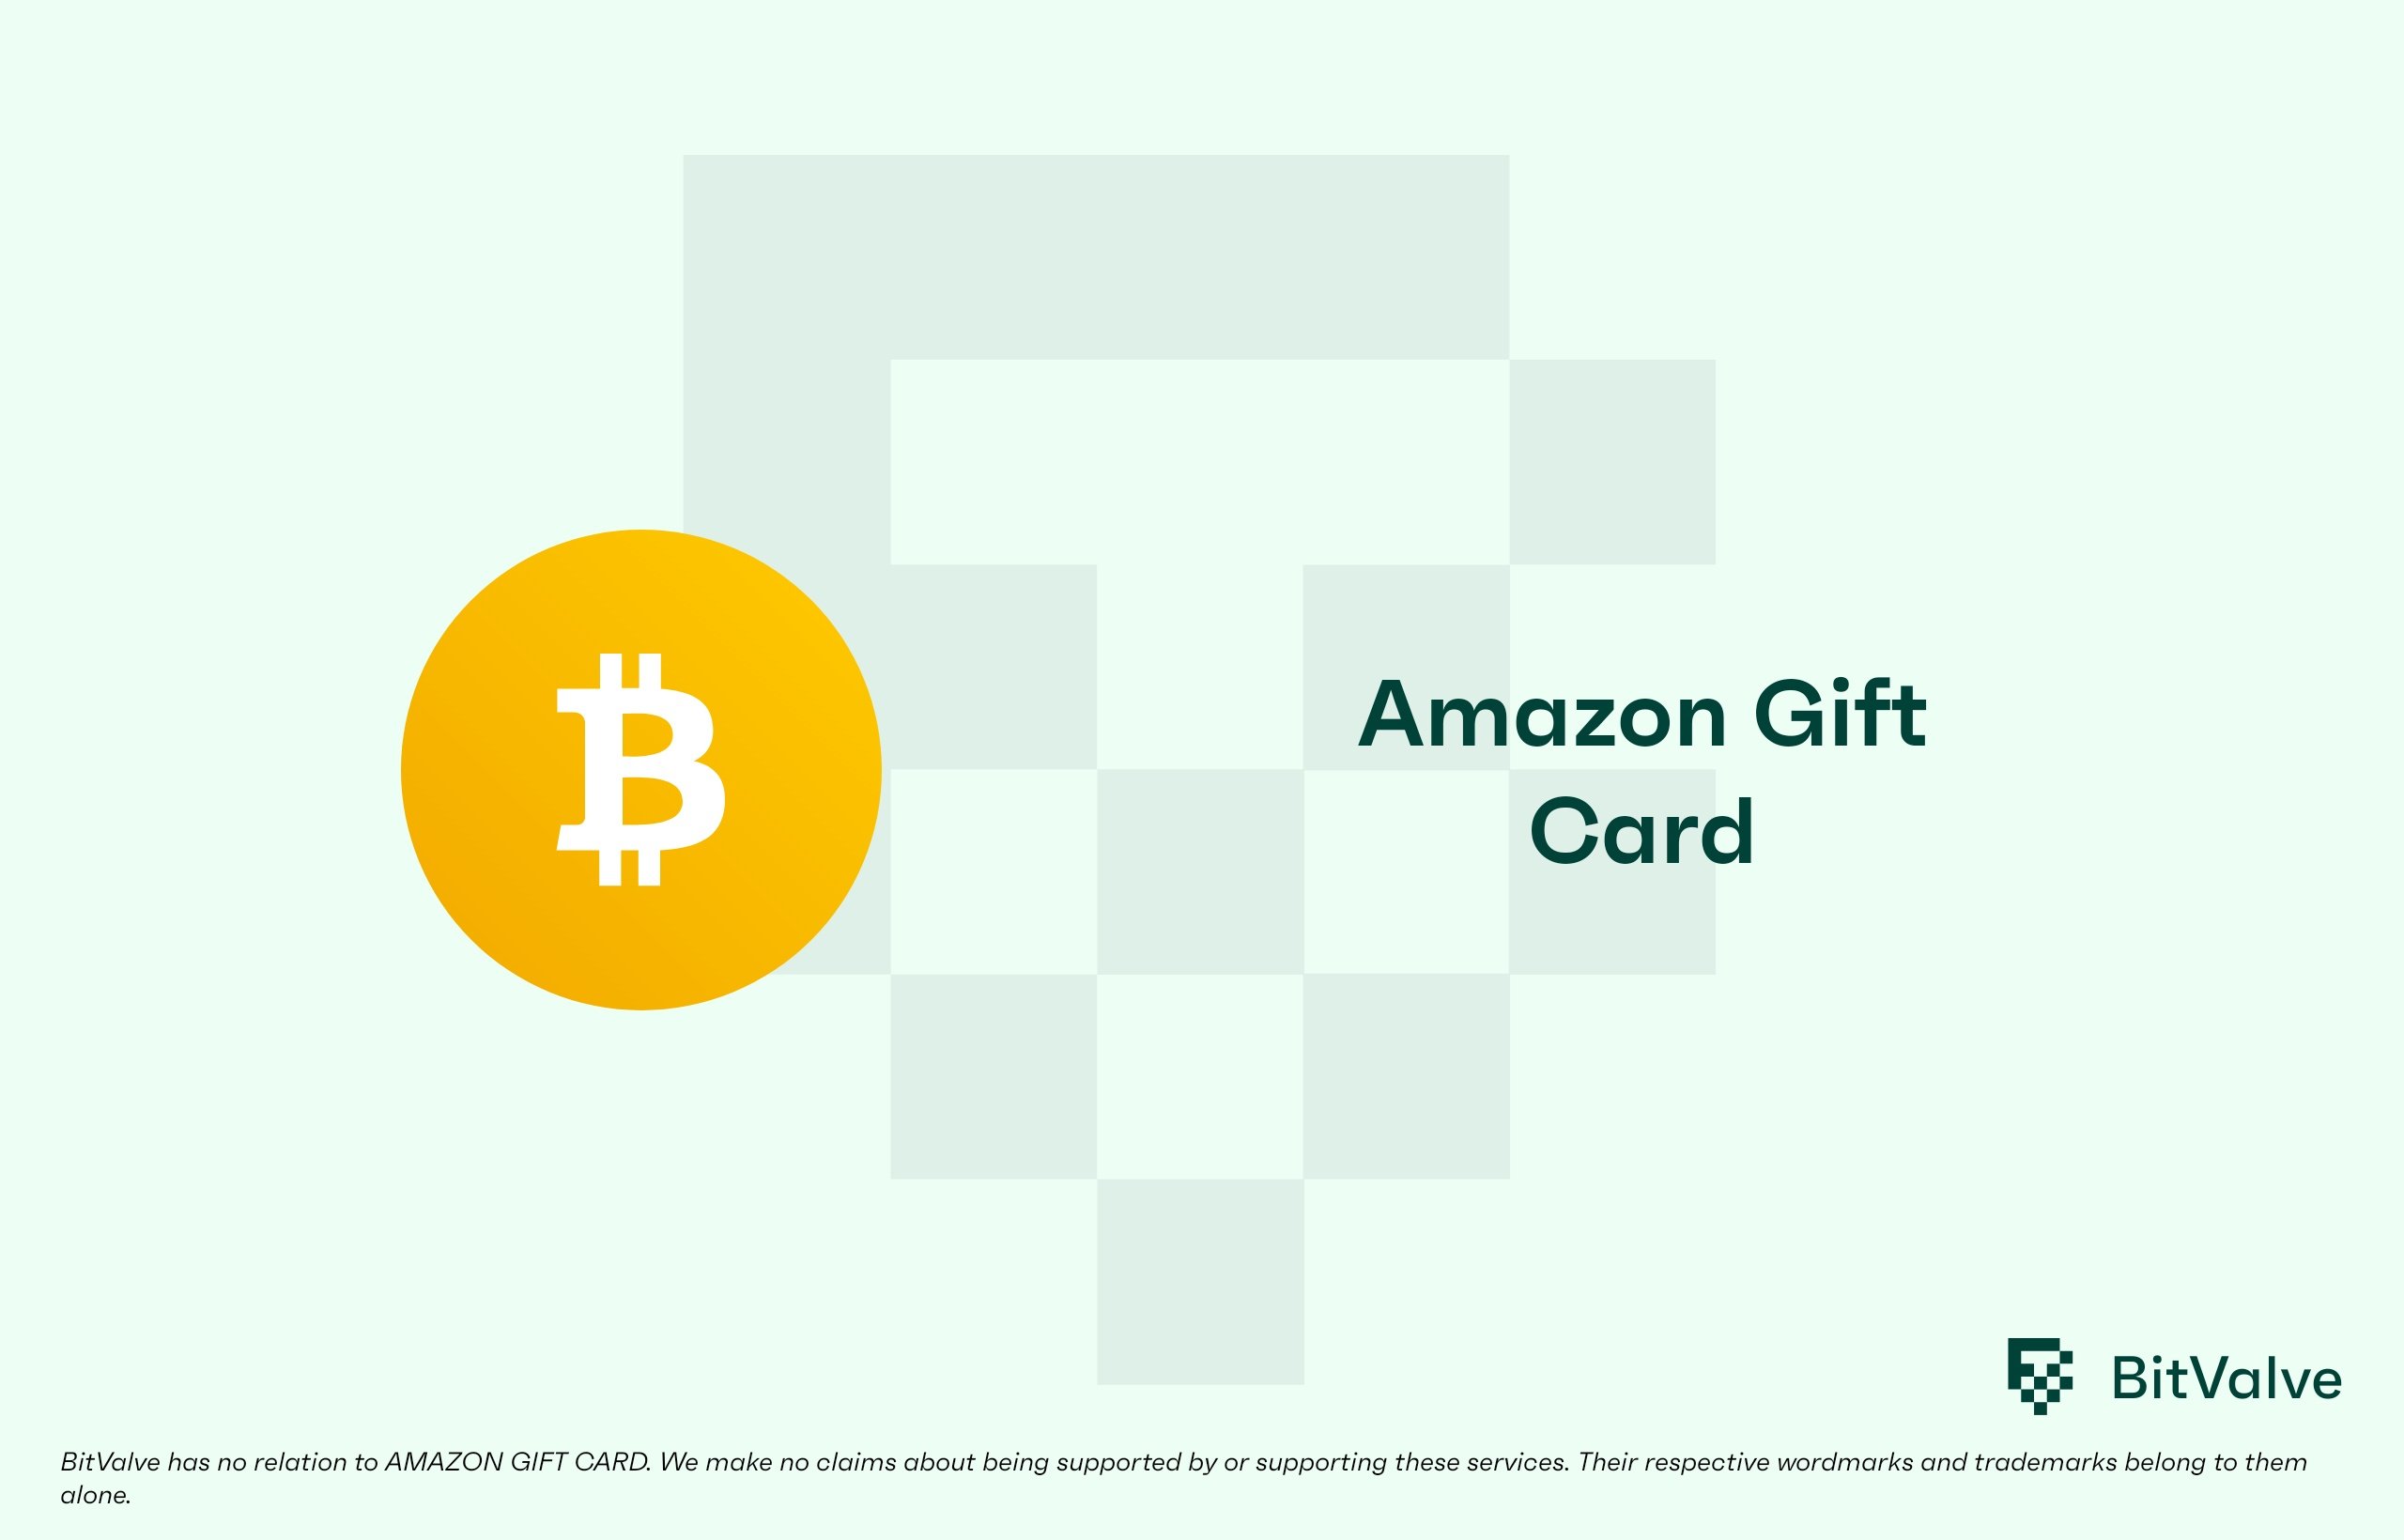 How to Spend Crypto on Amazon in Less Than 1 Minute